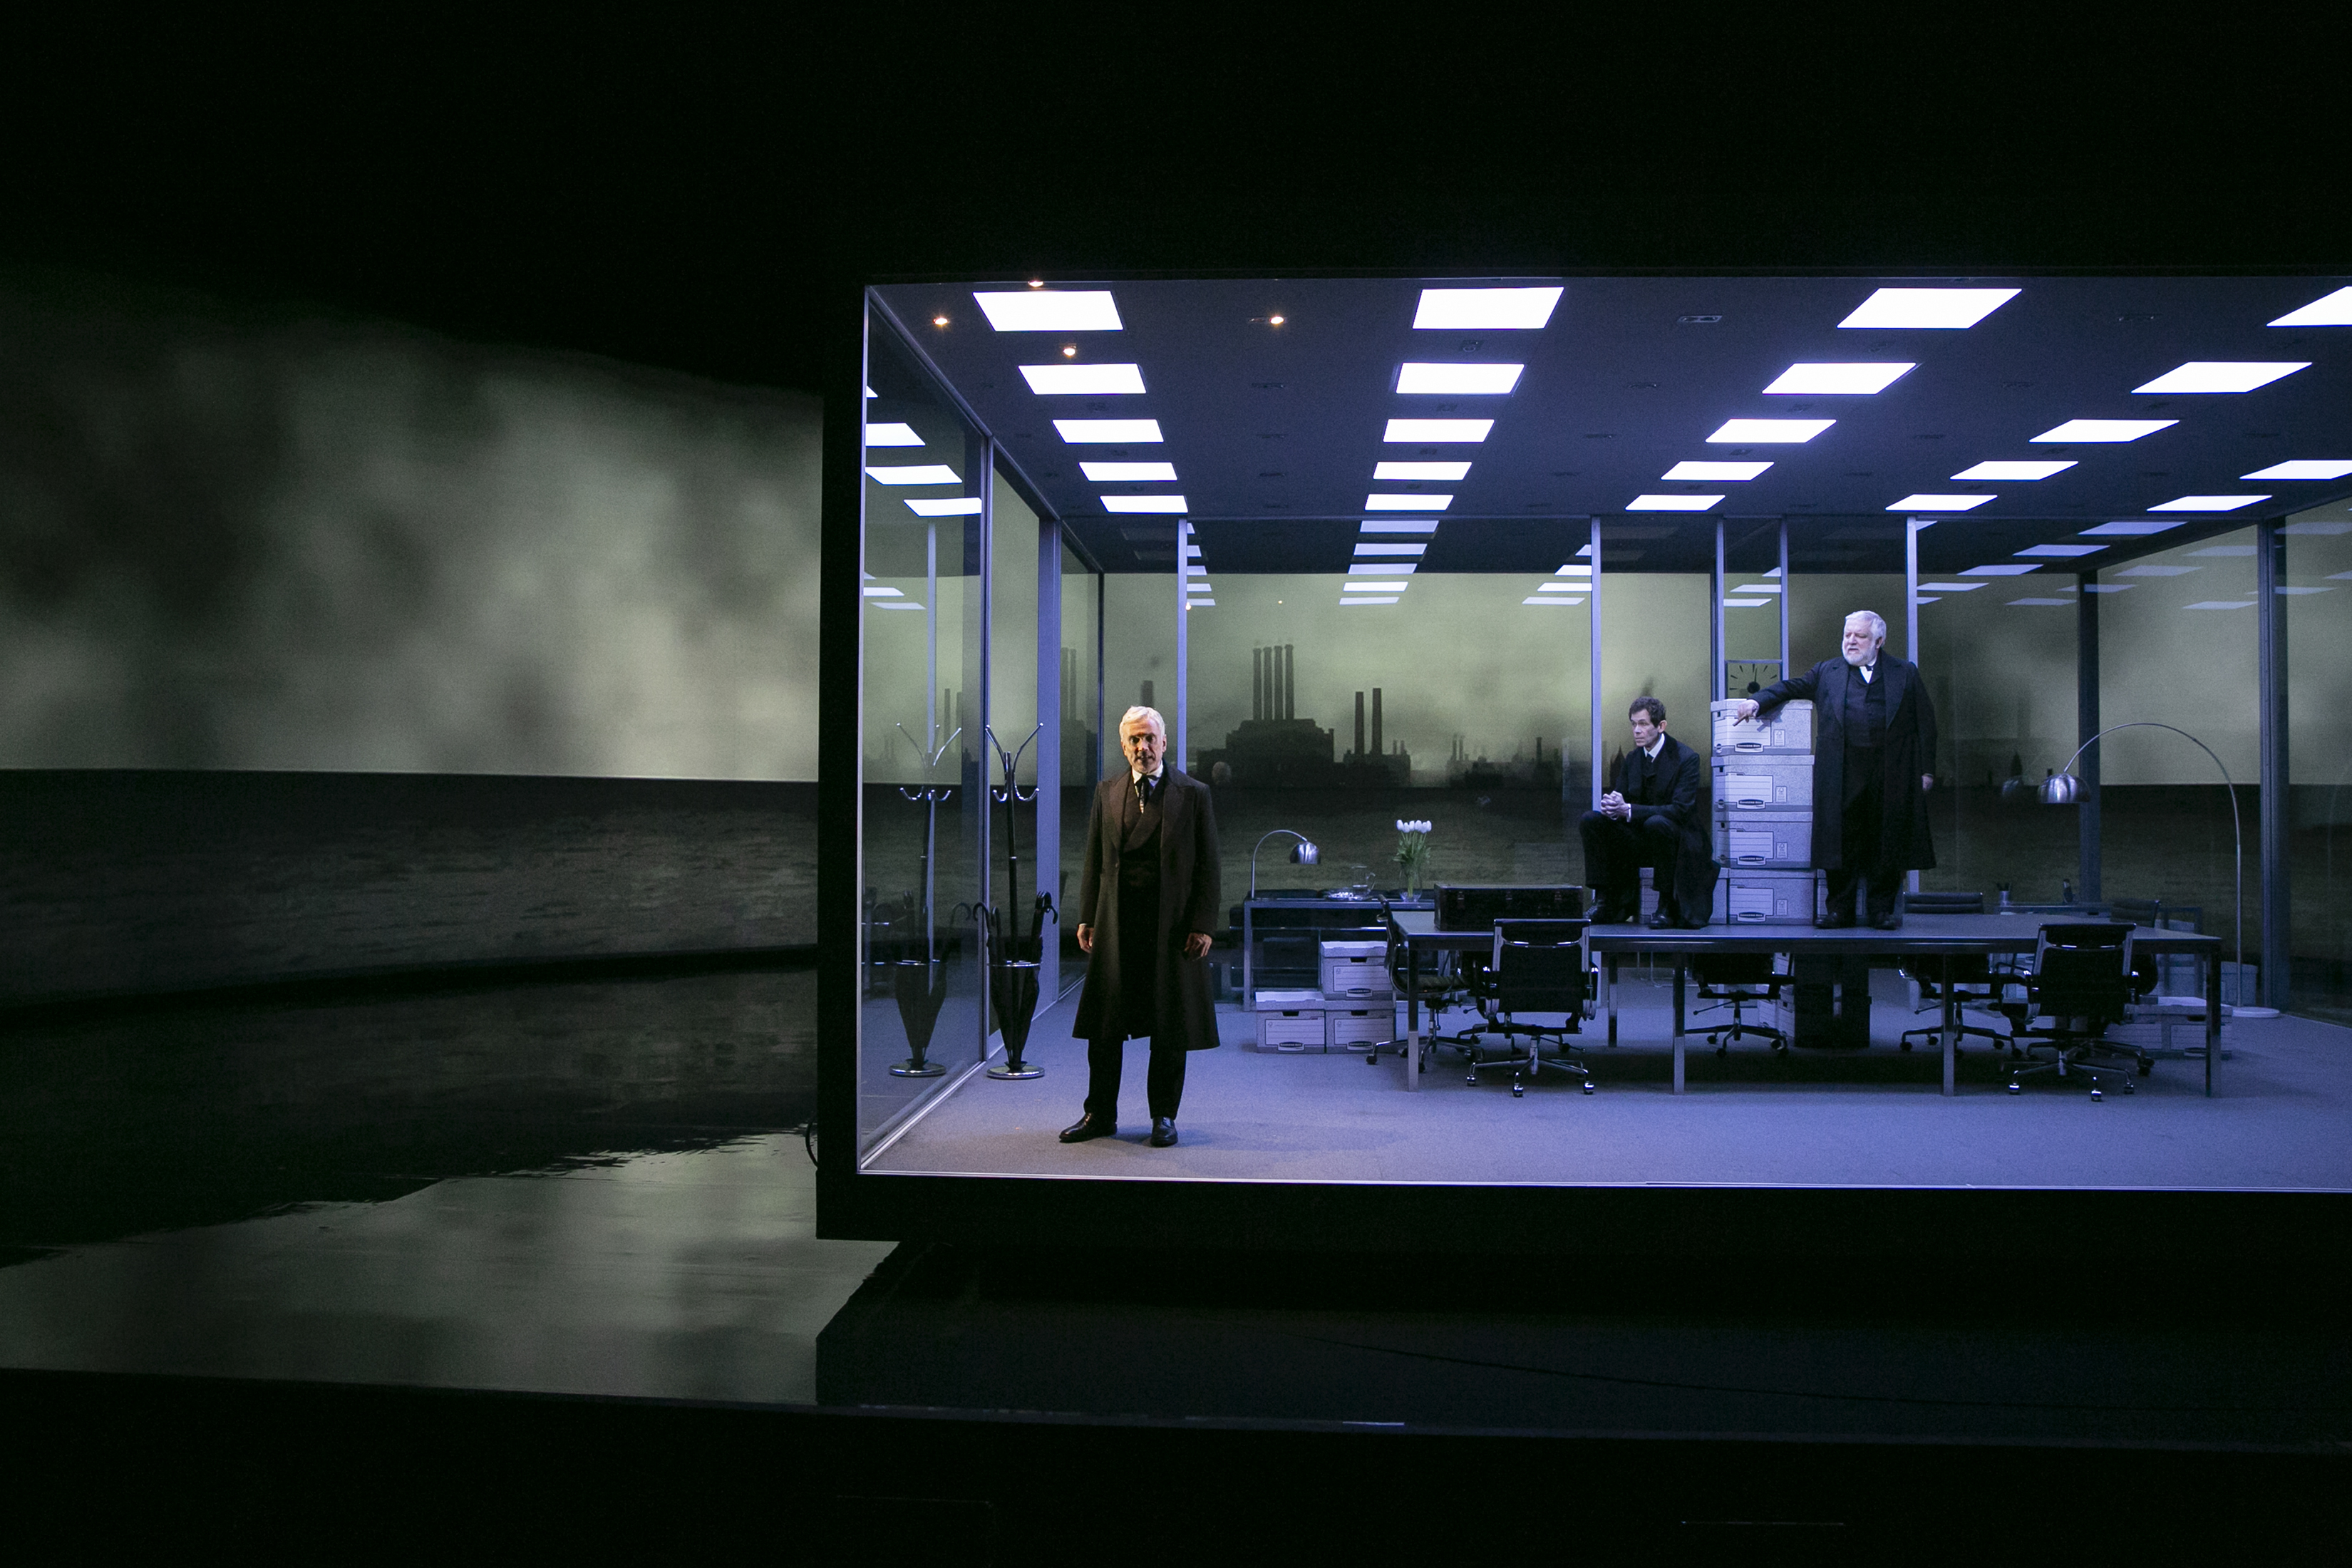 The Lehman Trilogy': Sam Mendes Inspired Show's Production Design